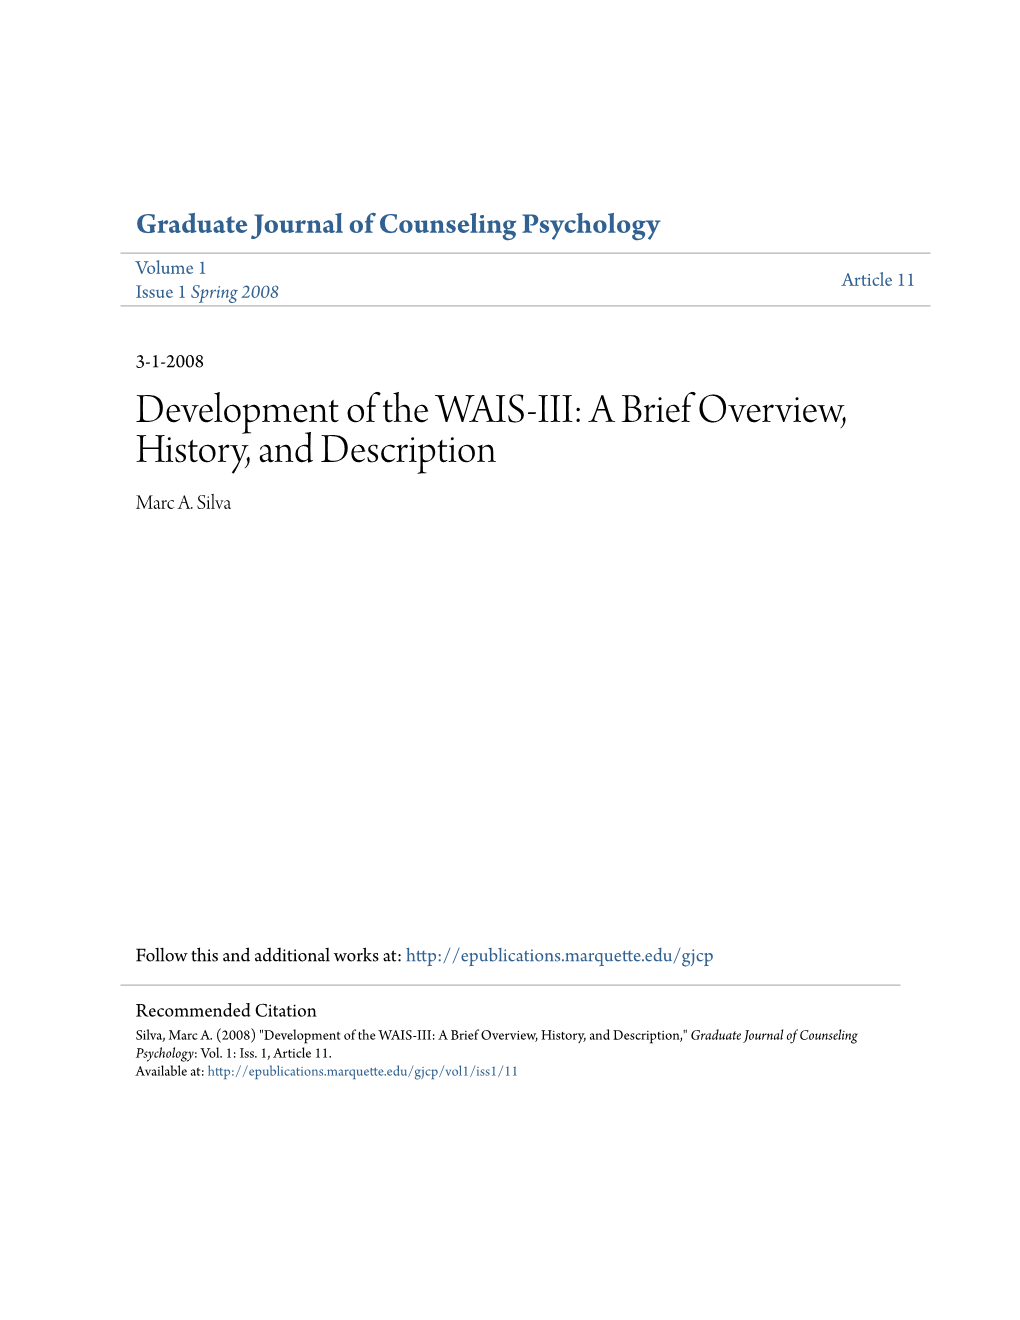 Development of the WAIS-III: a Brief Overview, History, and Description Marc A